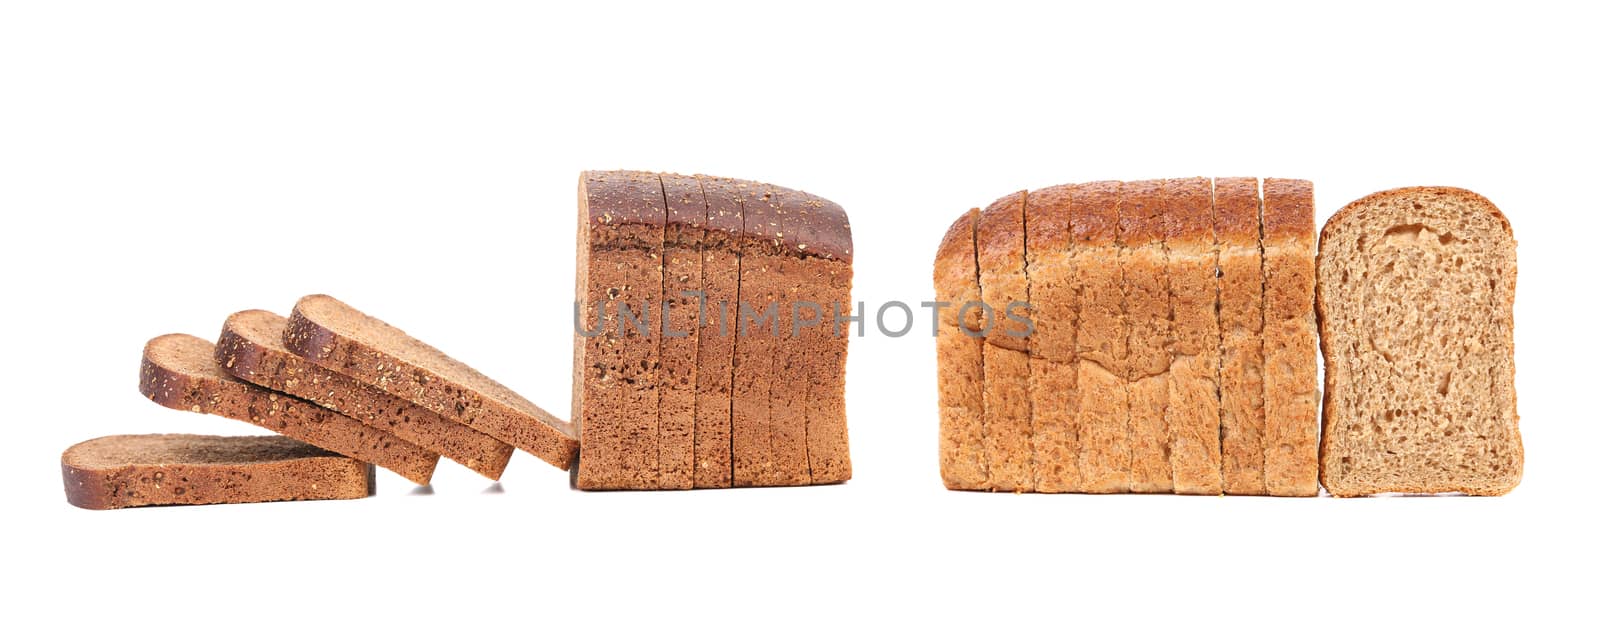 Compozition of sliced brown bread isolated on a white background